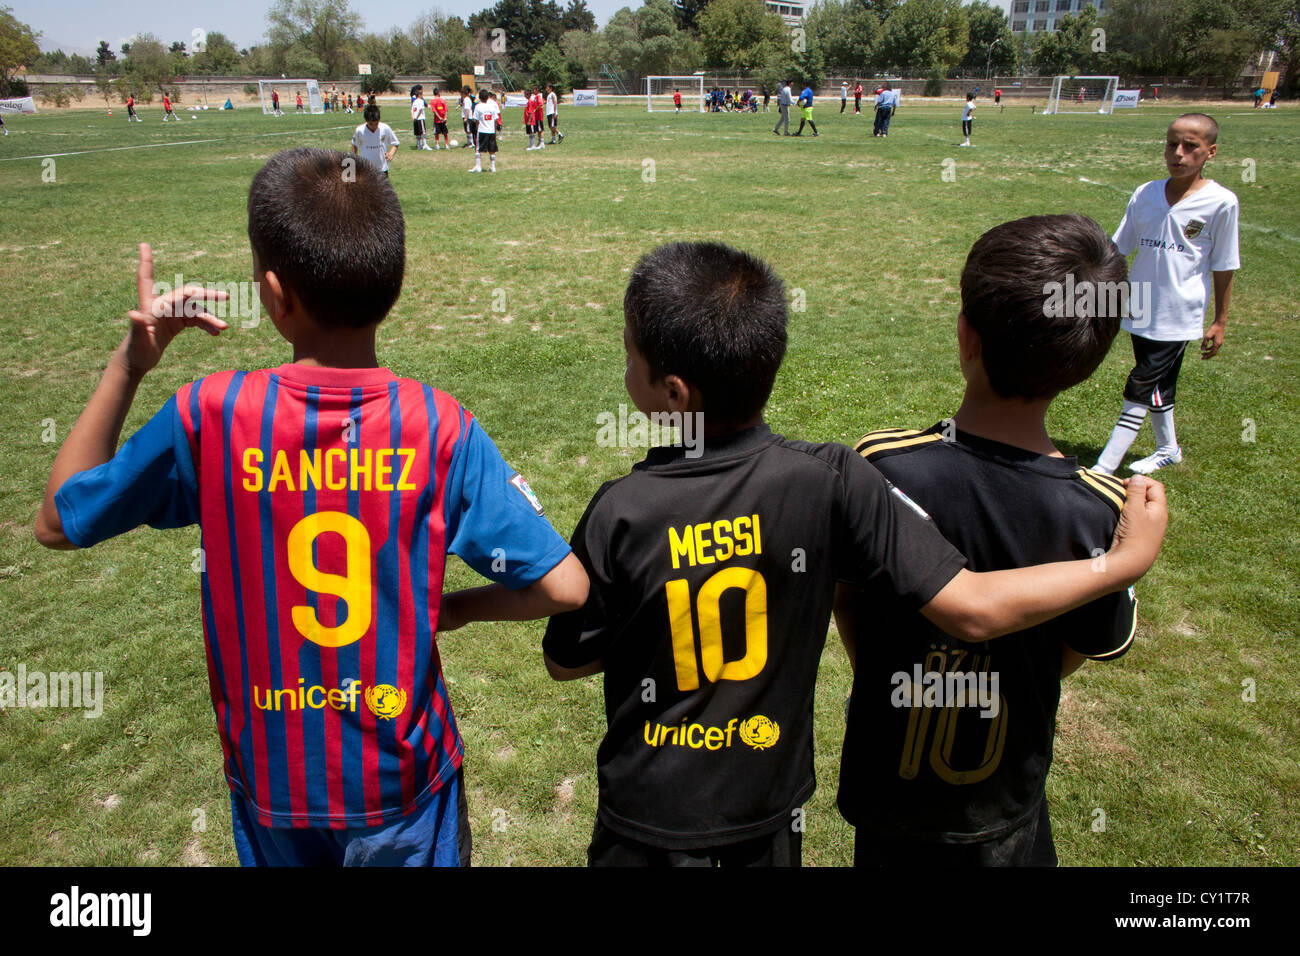 afghans group kids player players team children af Stock Photo